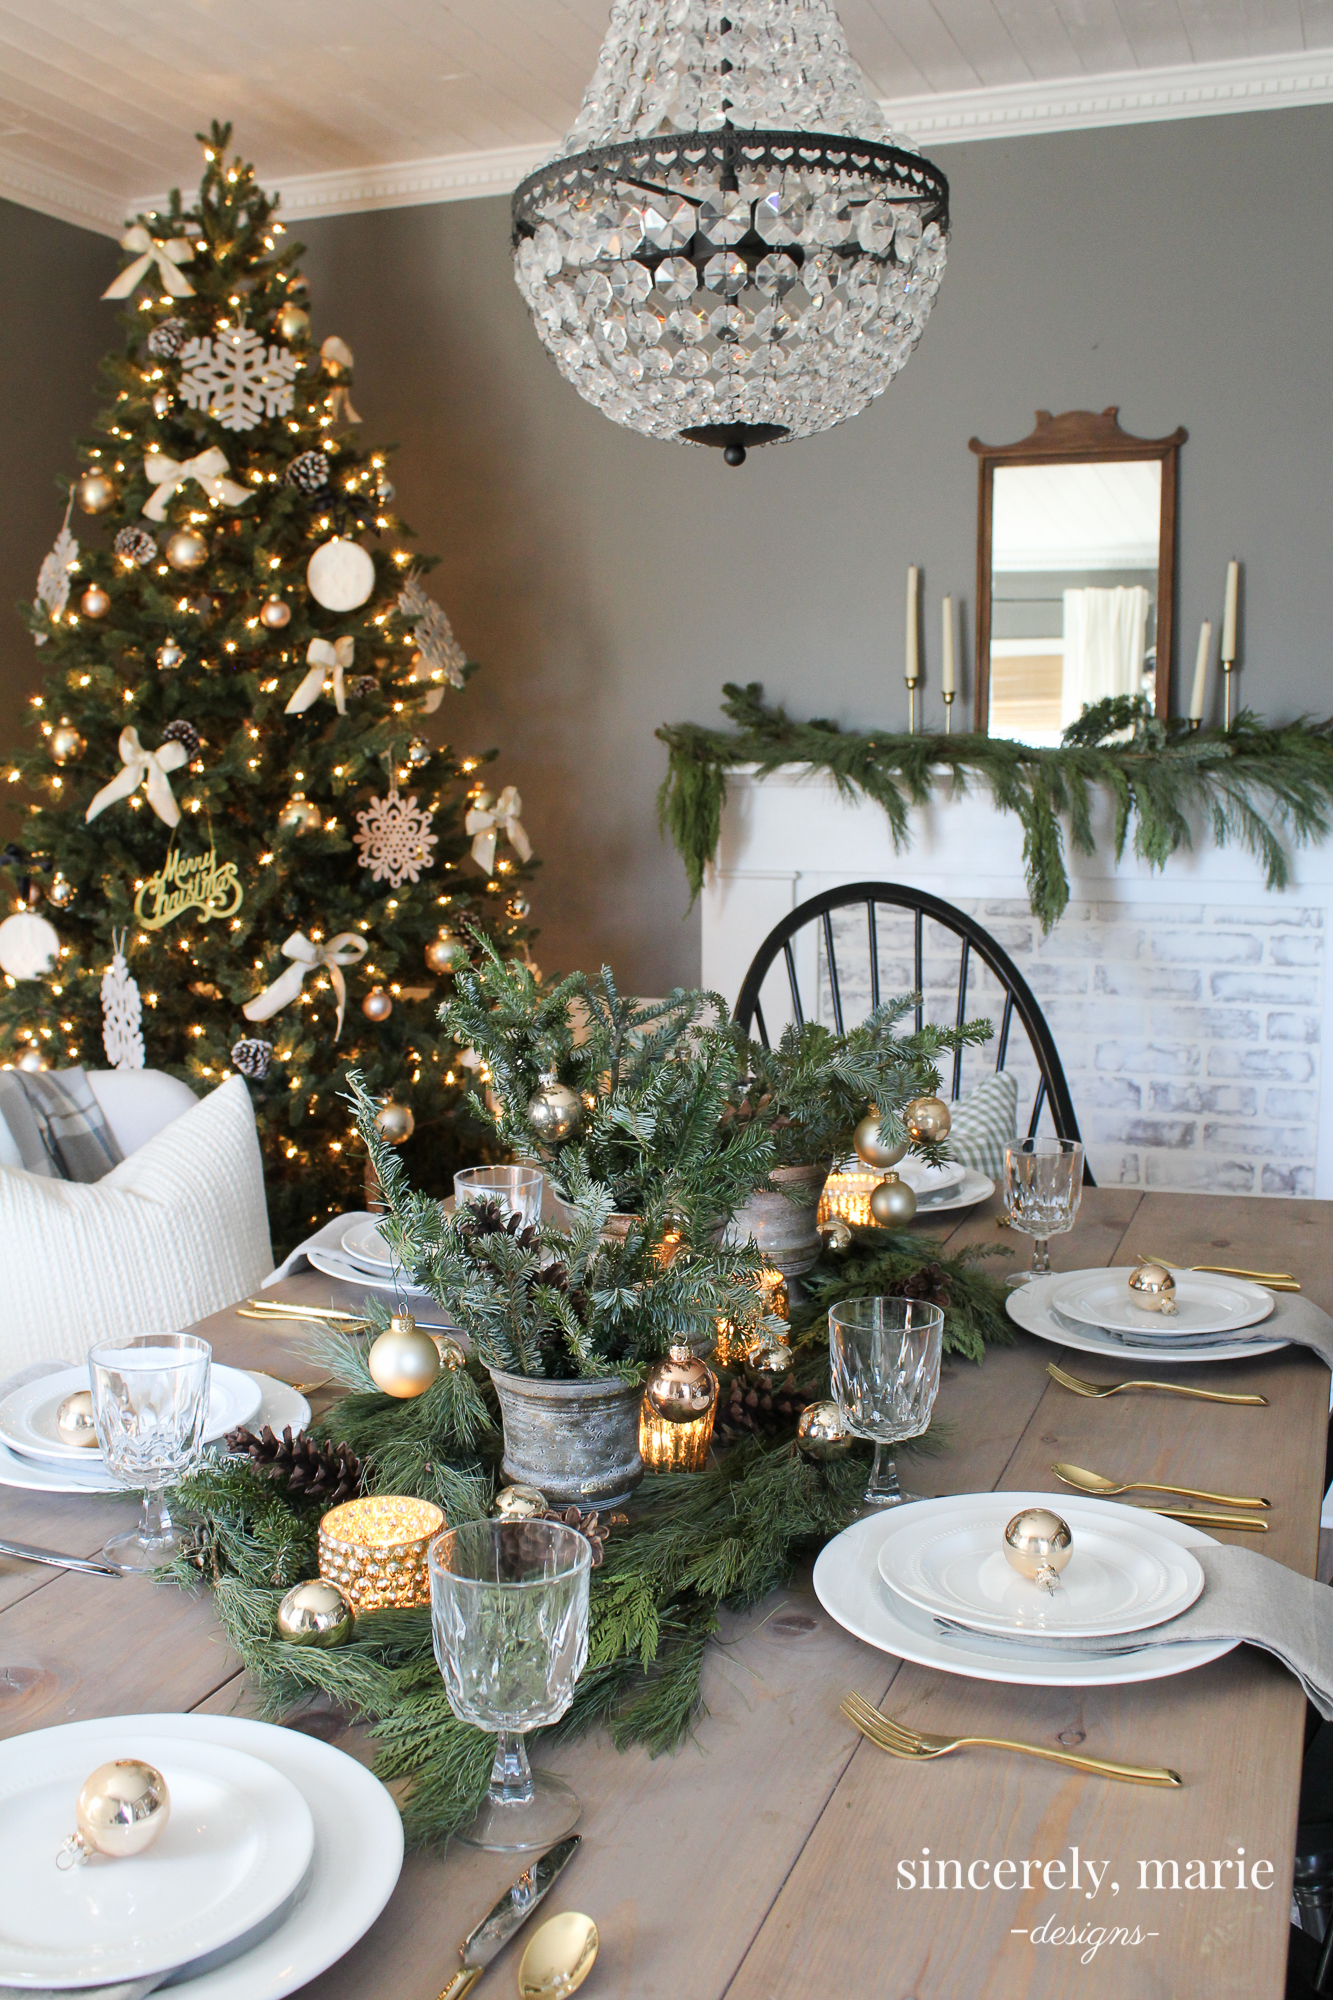 Rustic Elegance - A Christmas Tablescape - Sincerely, Marie Designs